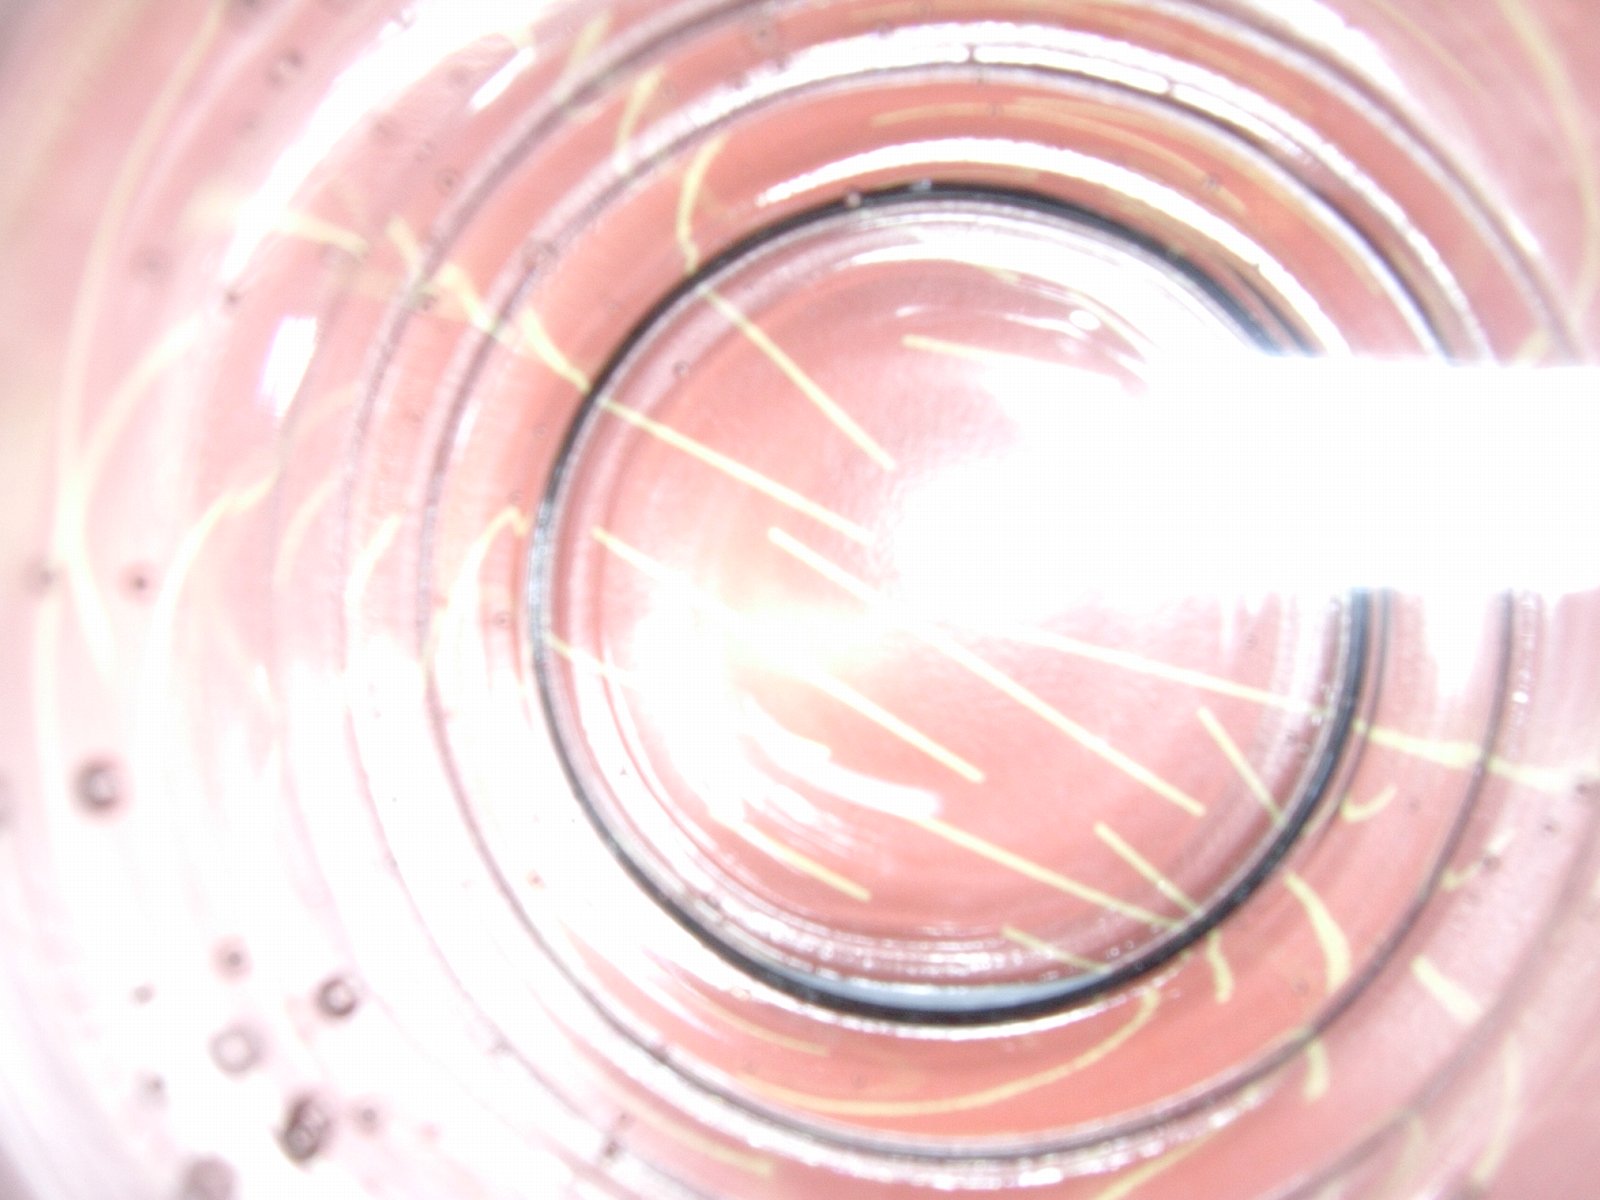 this is a close up view of a pink object